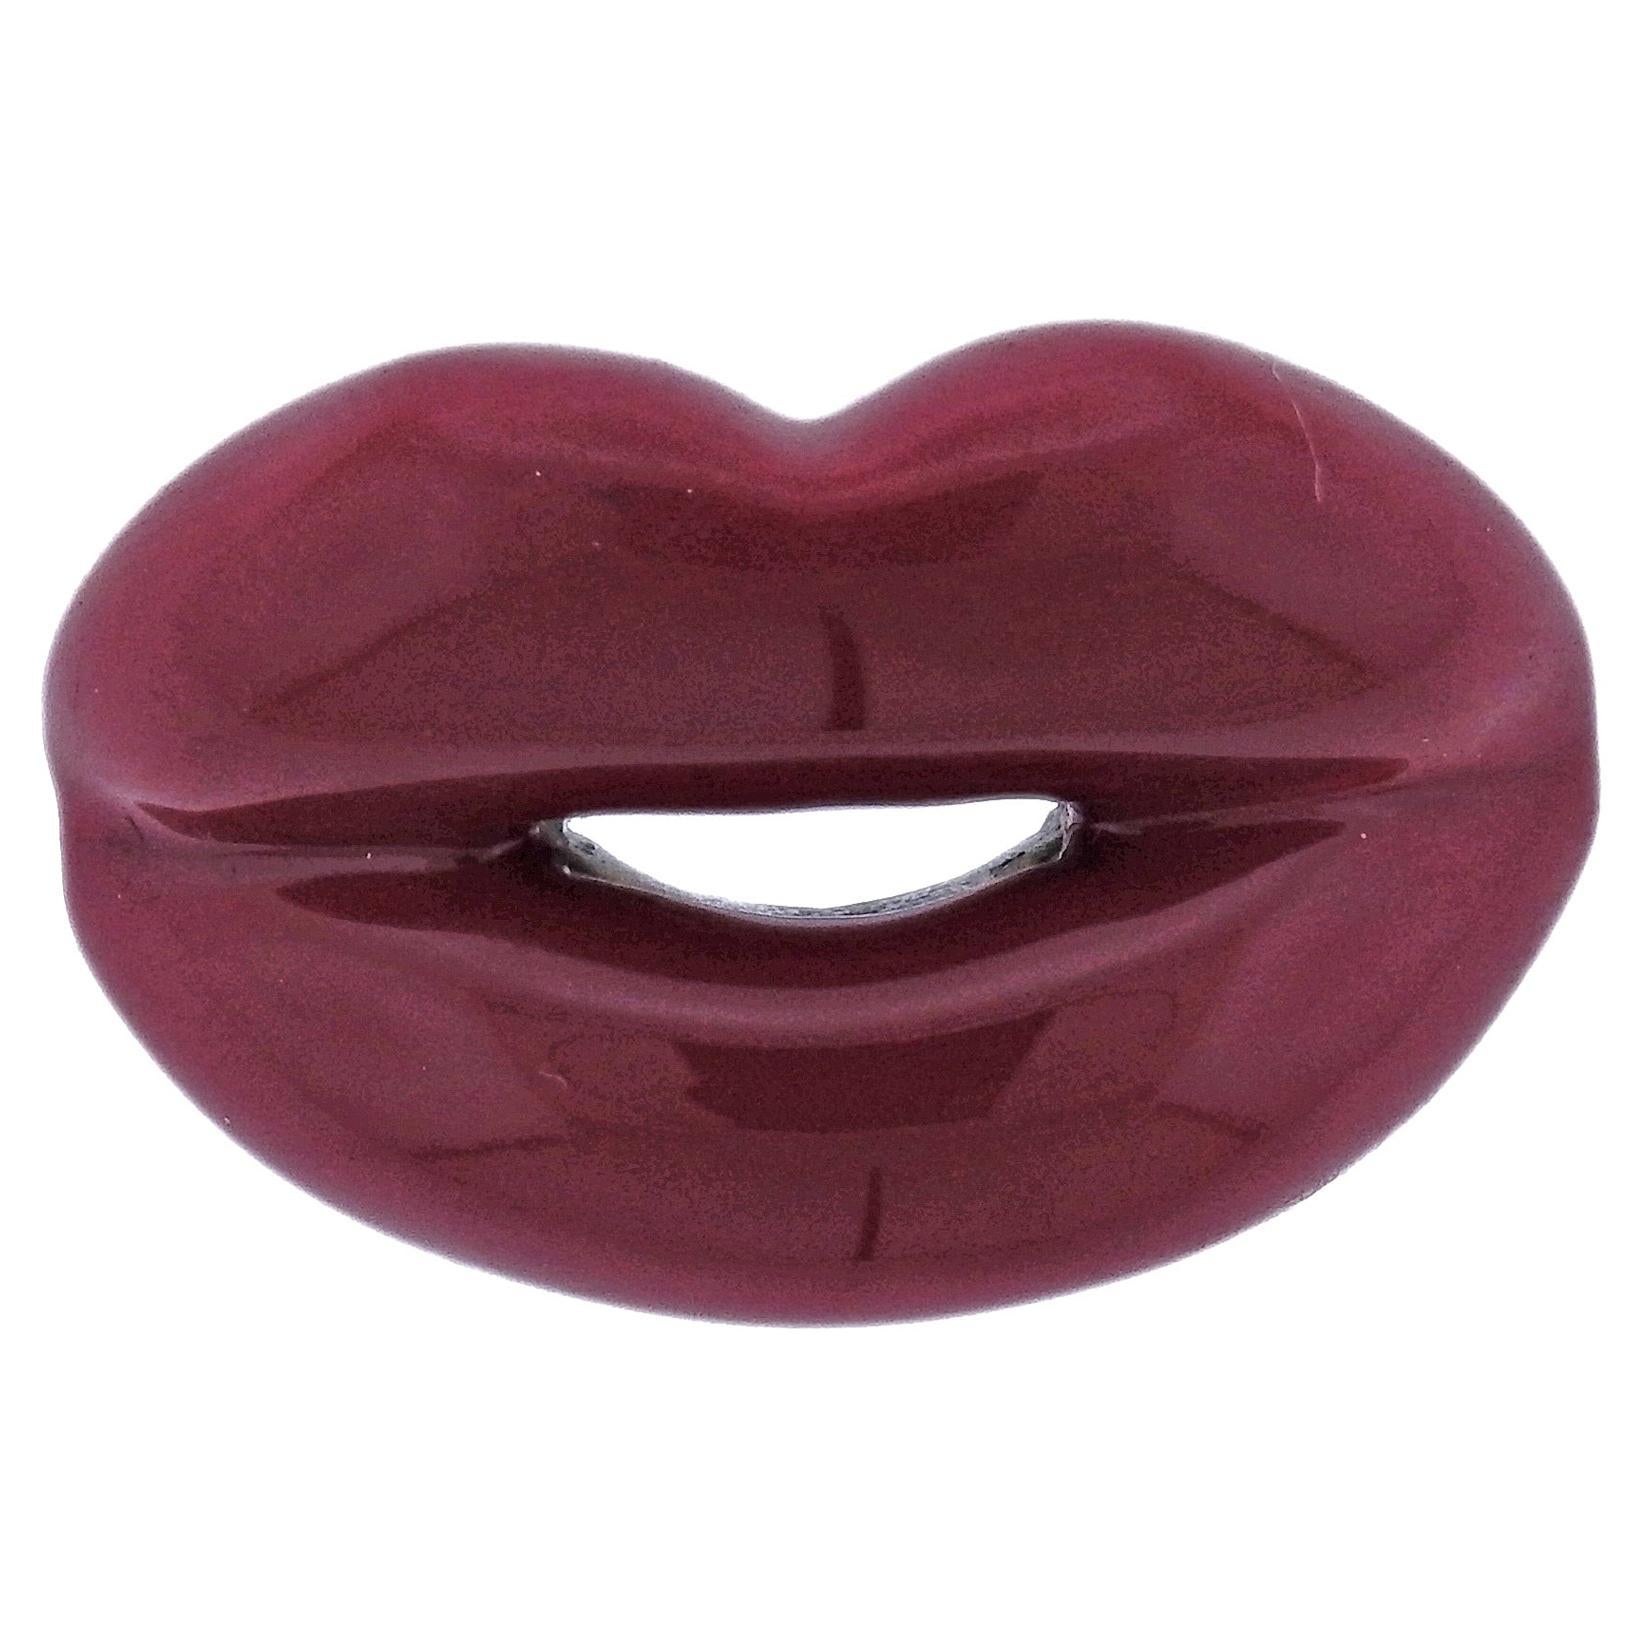 Solange Azagury Partridge Red Lips Silver Brooch For Sale